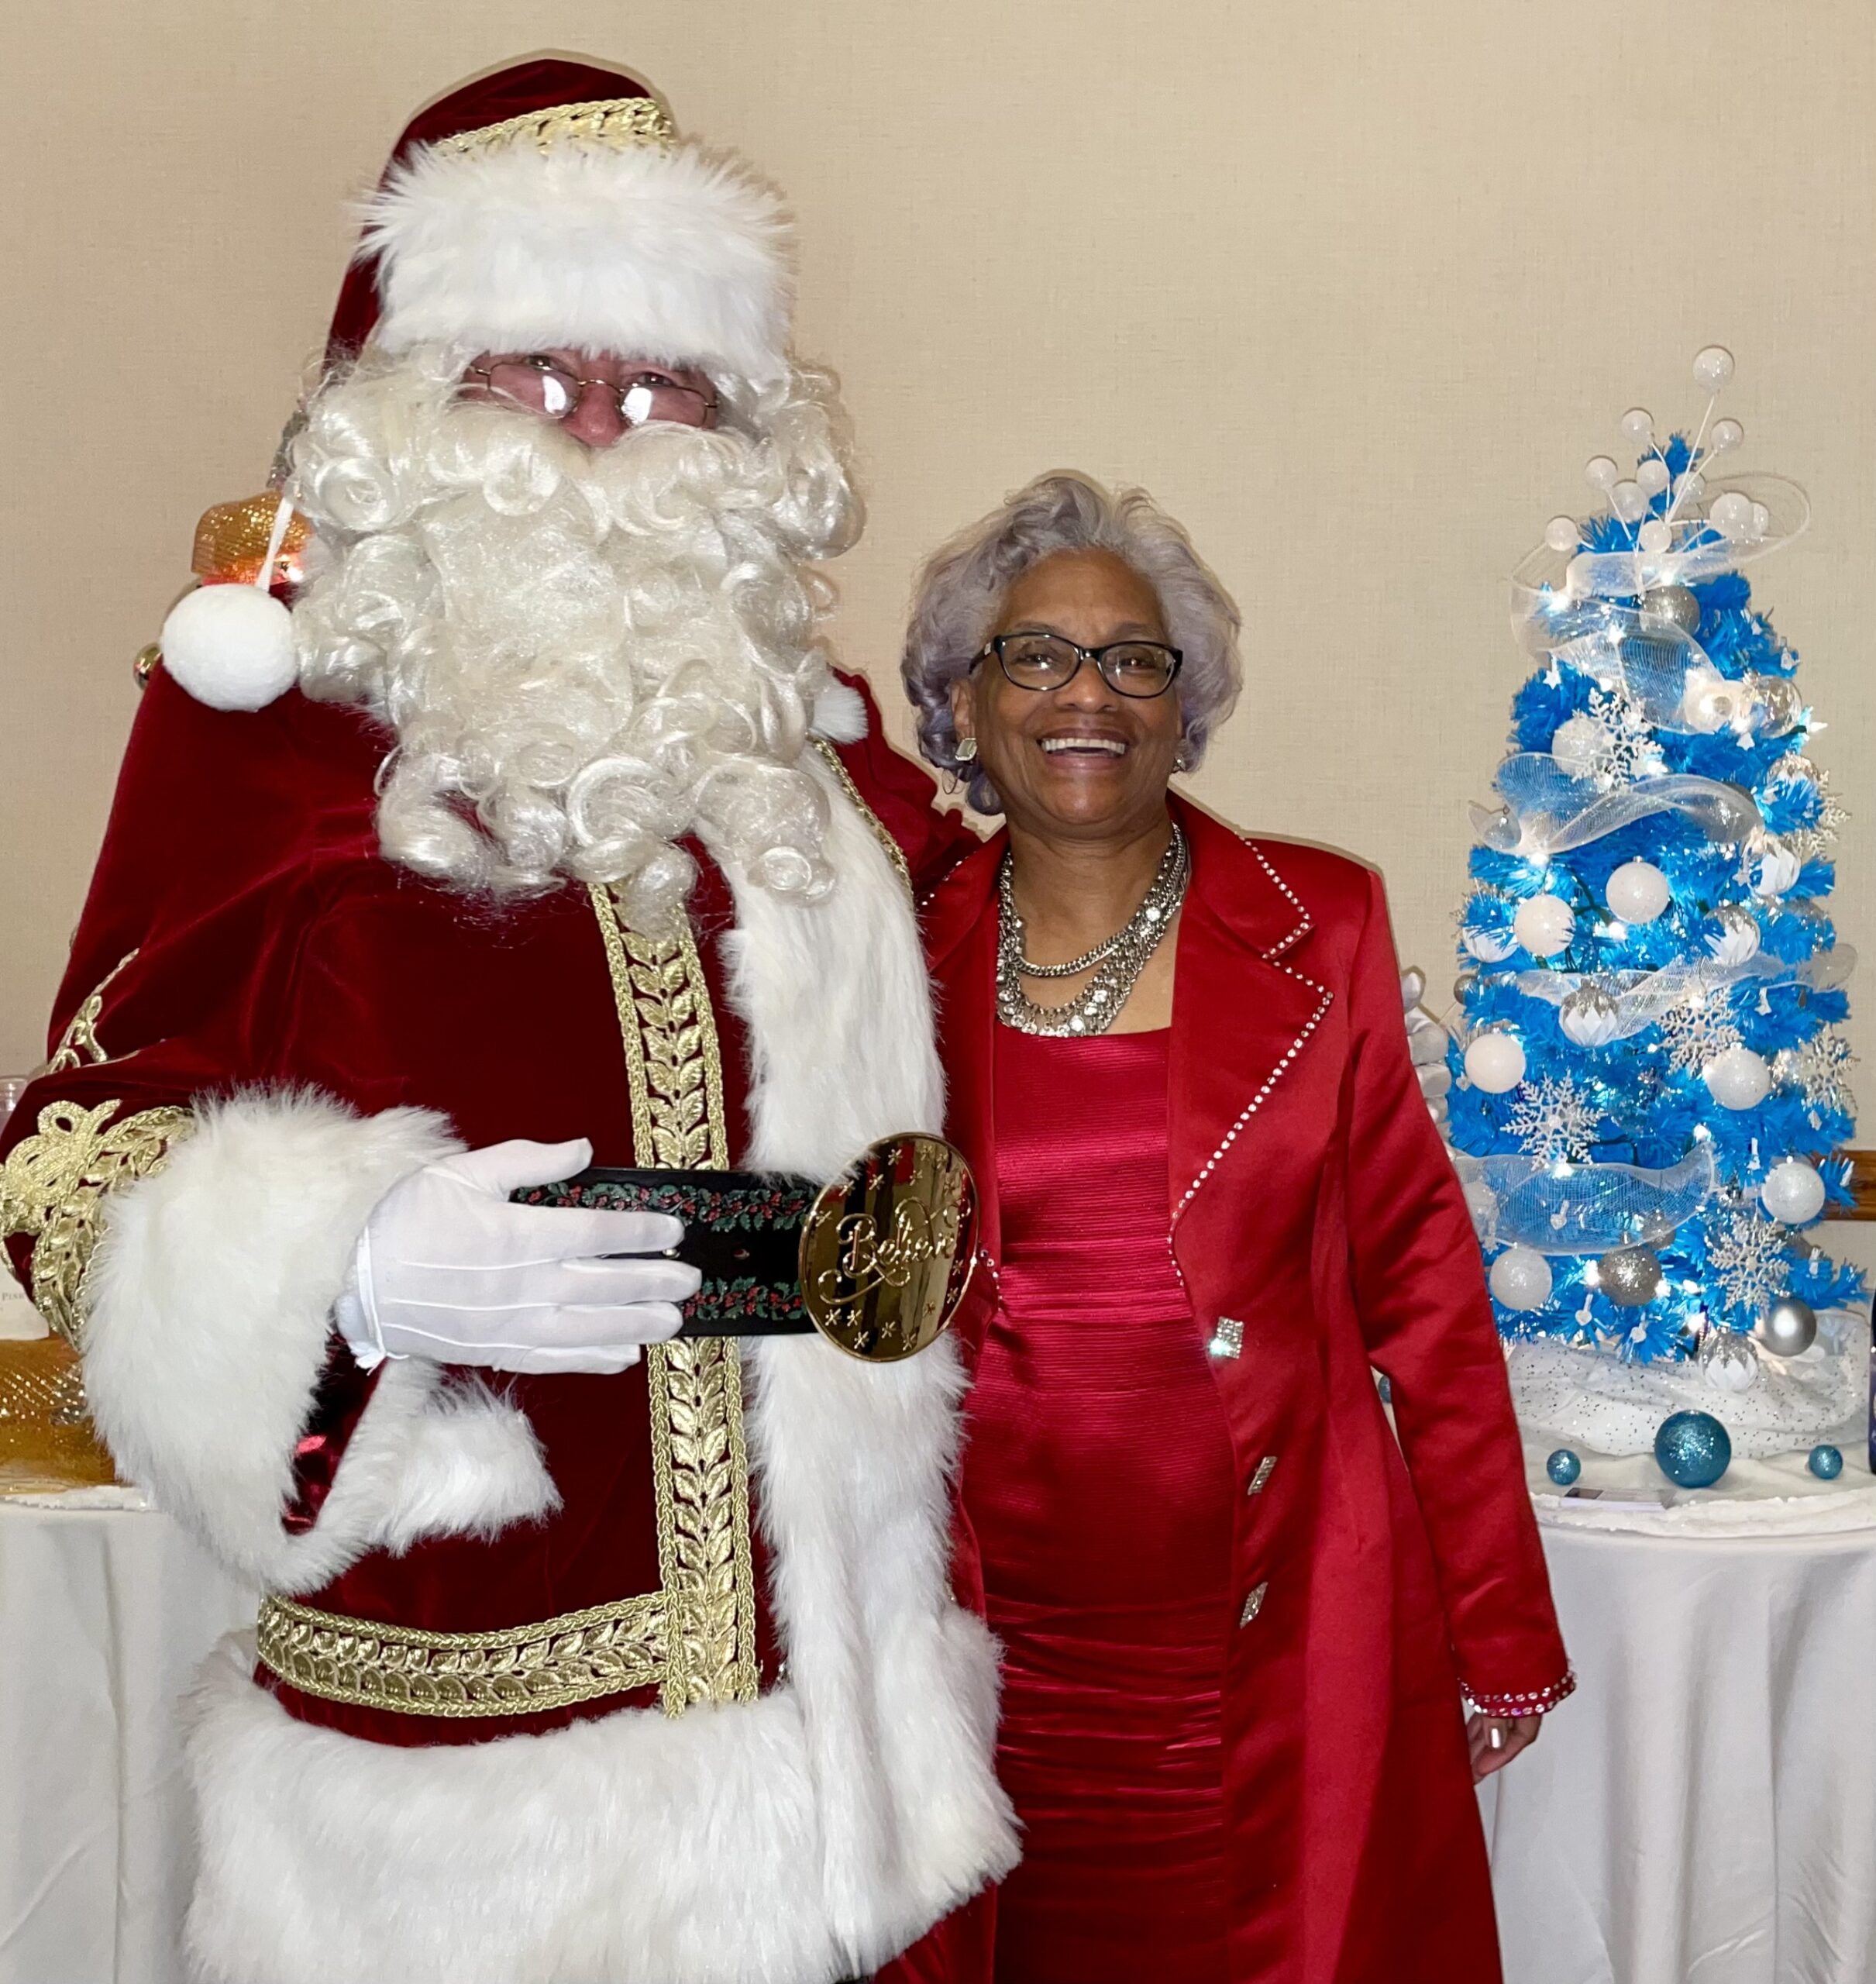 Santa Claus Smiling with Woman at Party